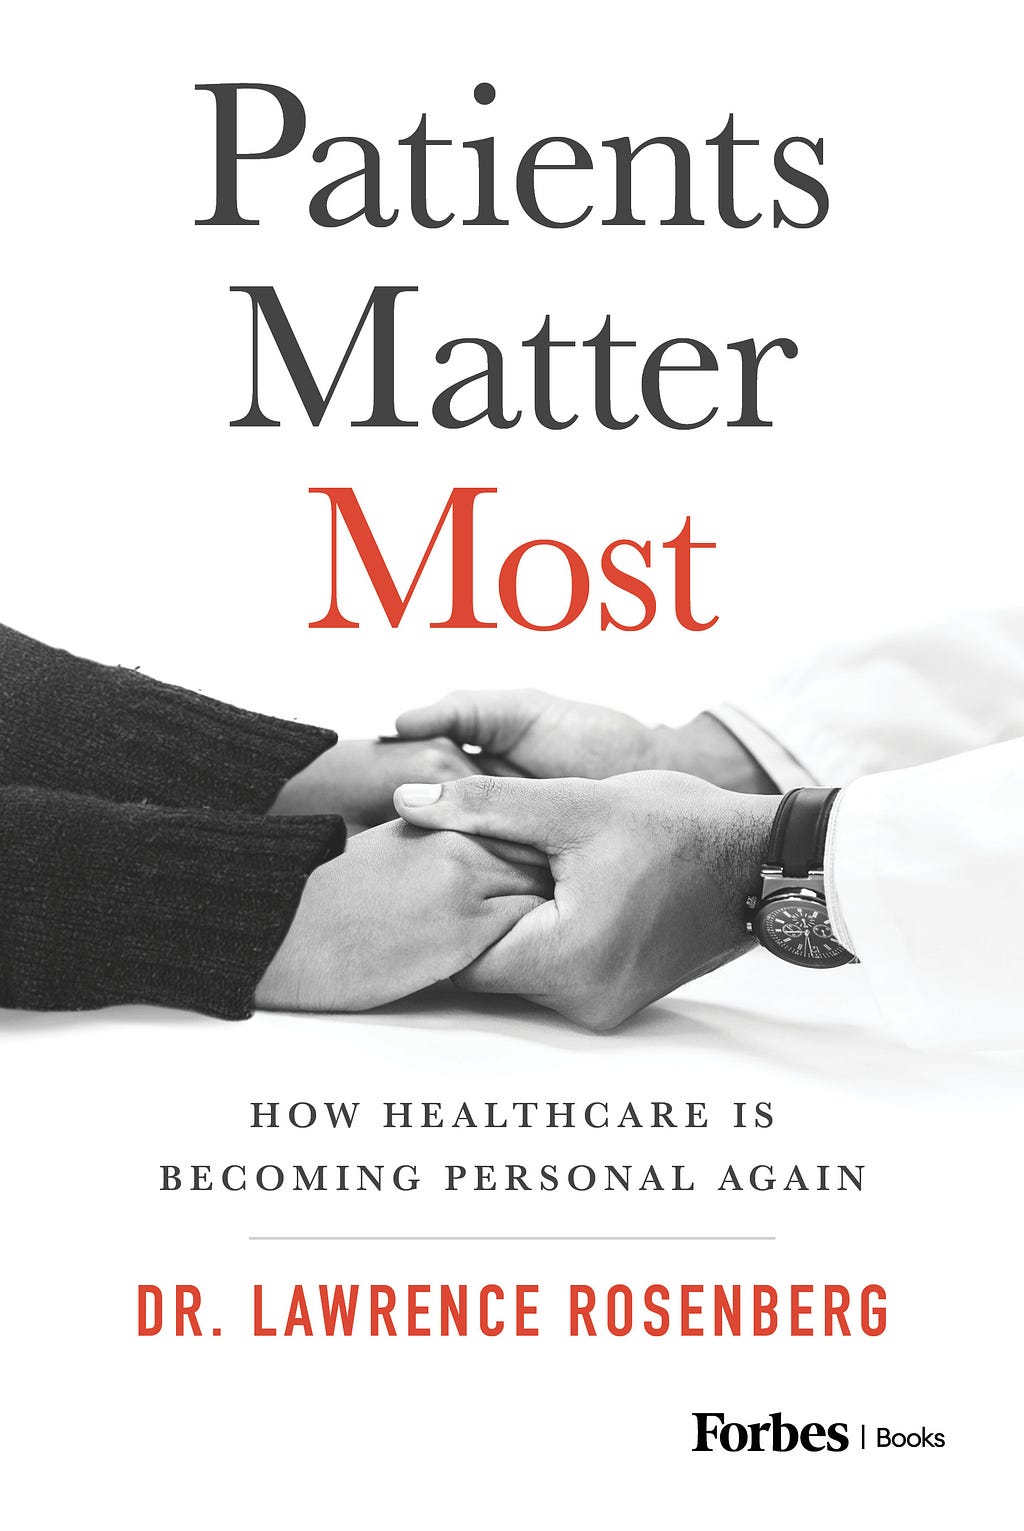 Patients Matter Most: How Healthcare Is Becoming Personal Again PDF